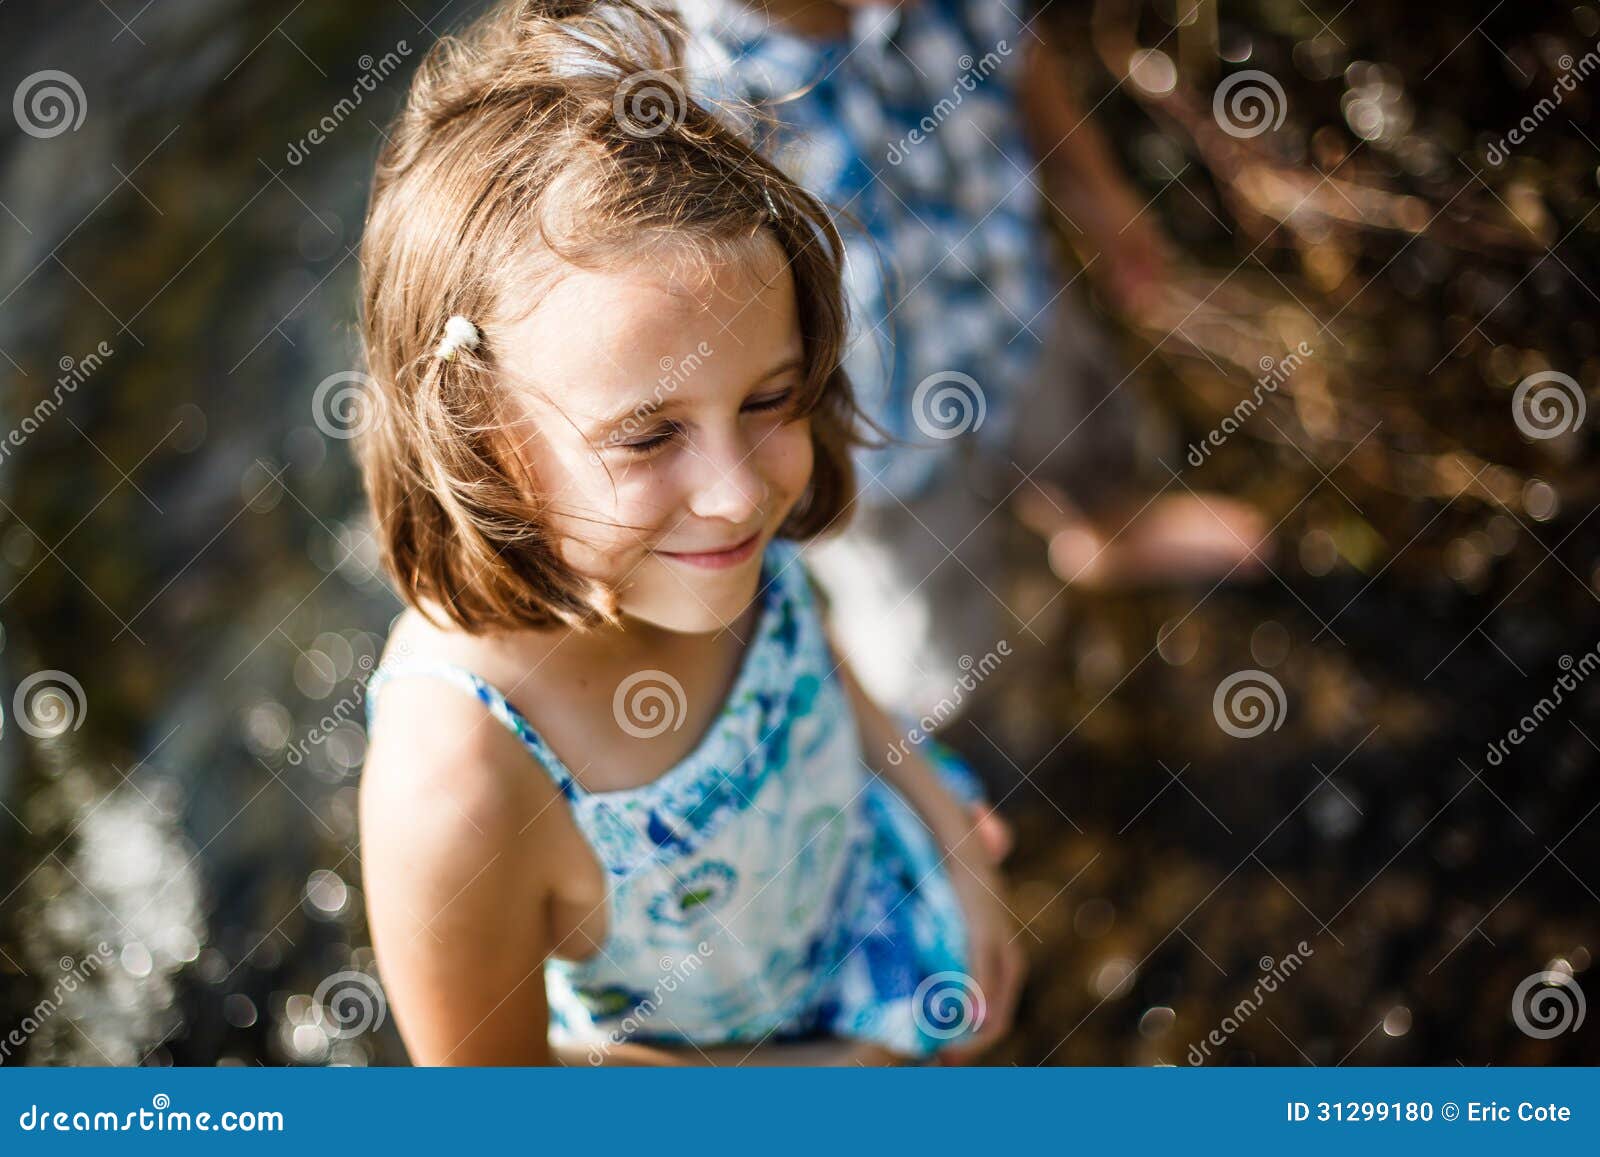 Girl smiling in the sun stock photo. Image of brother - 31299180